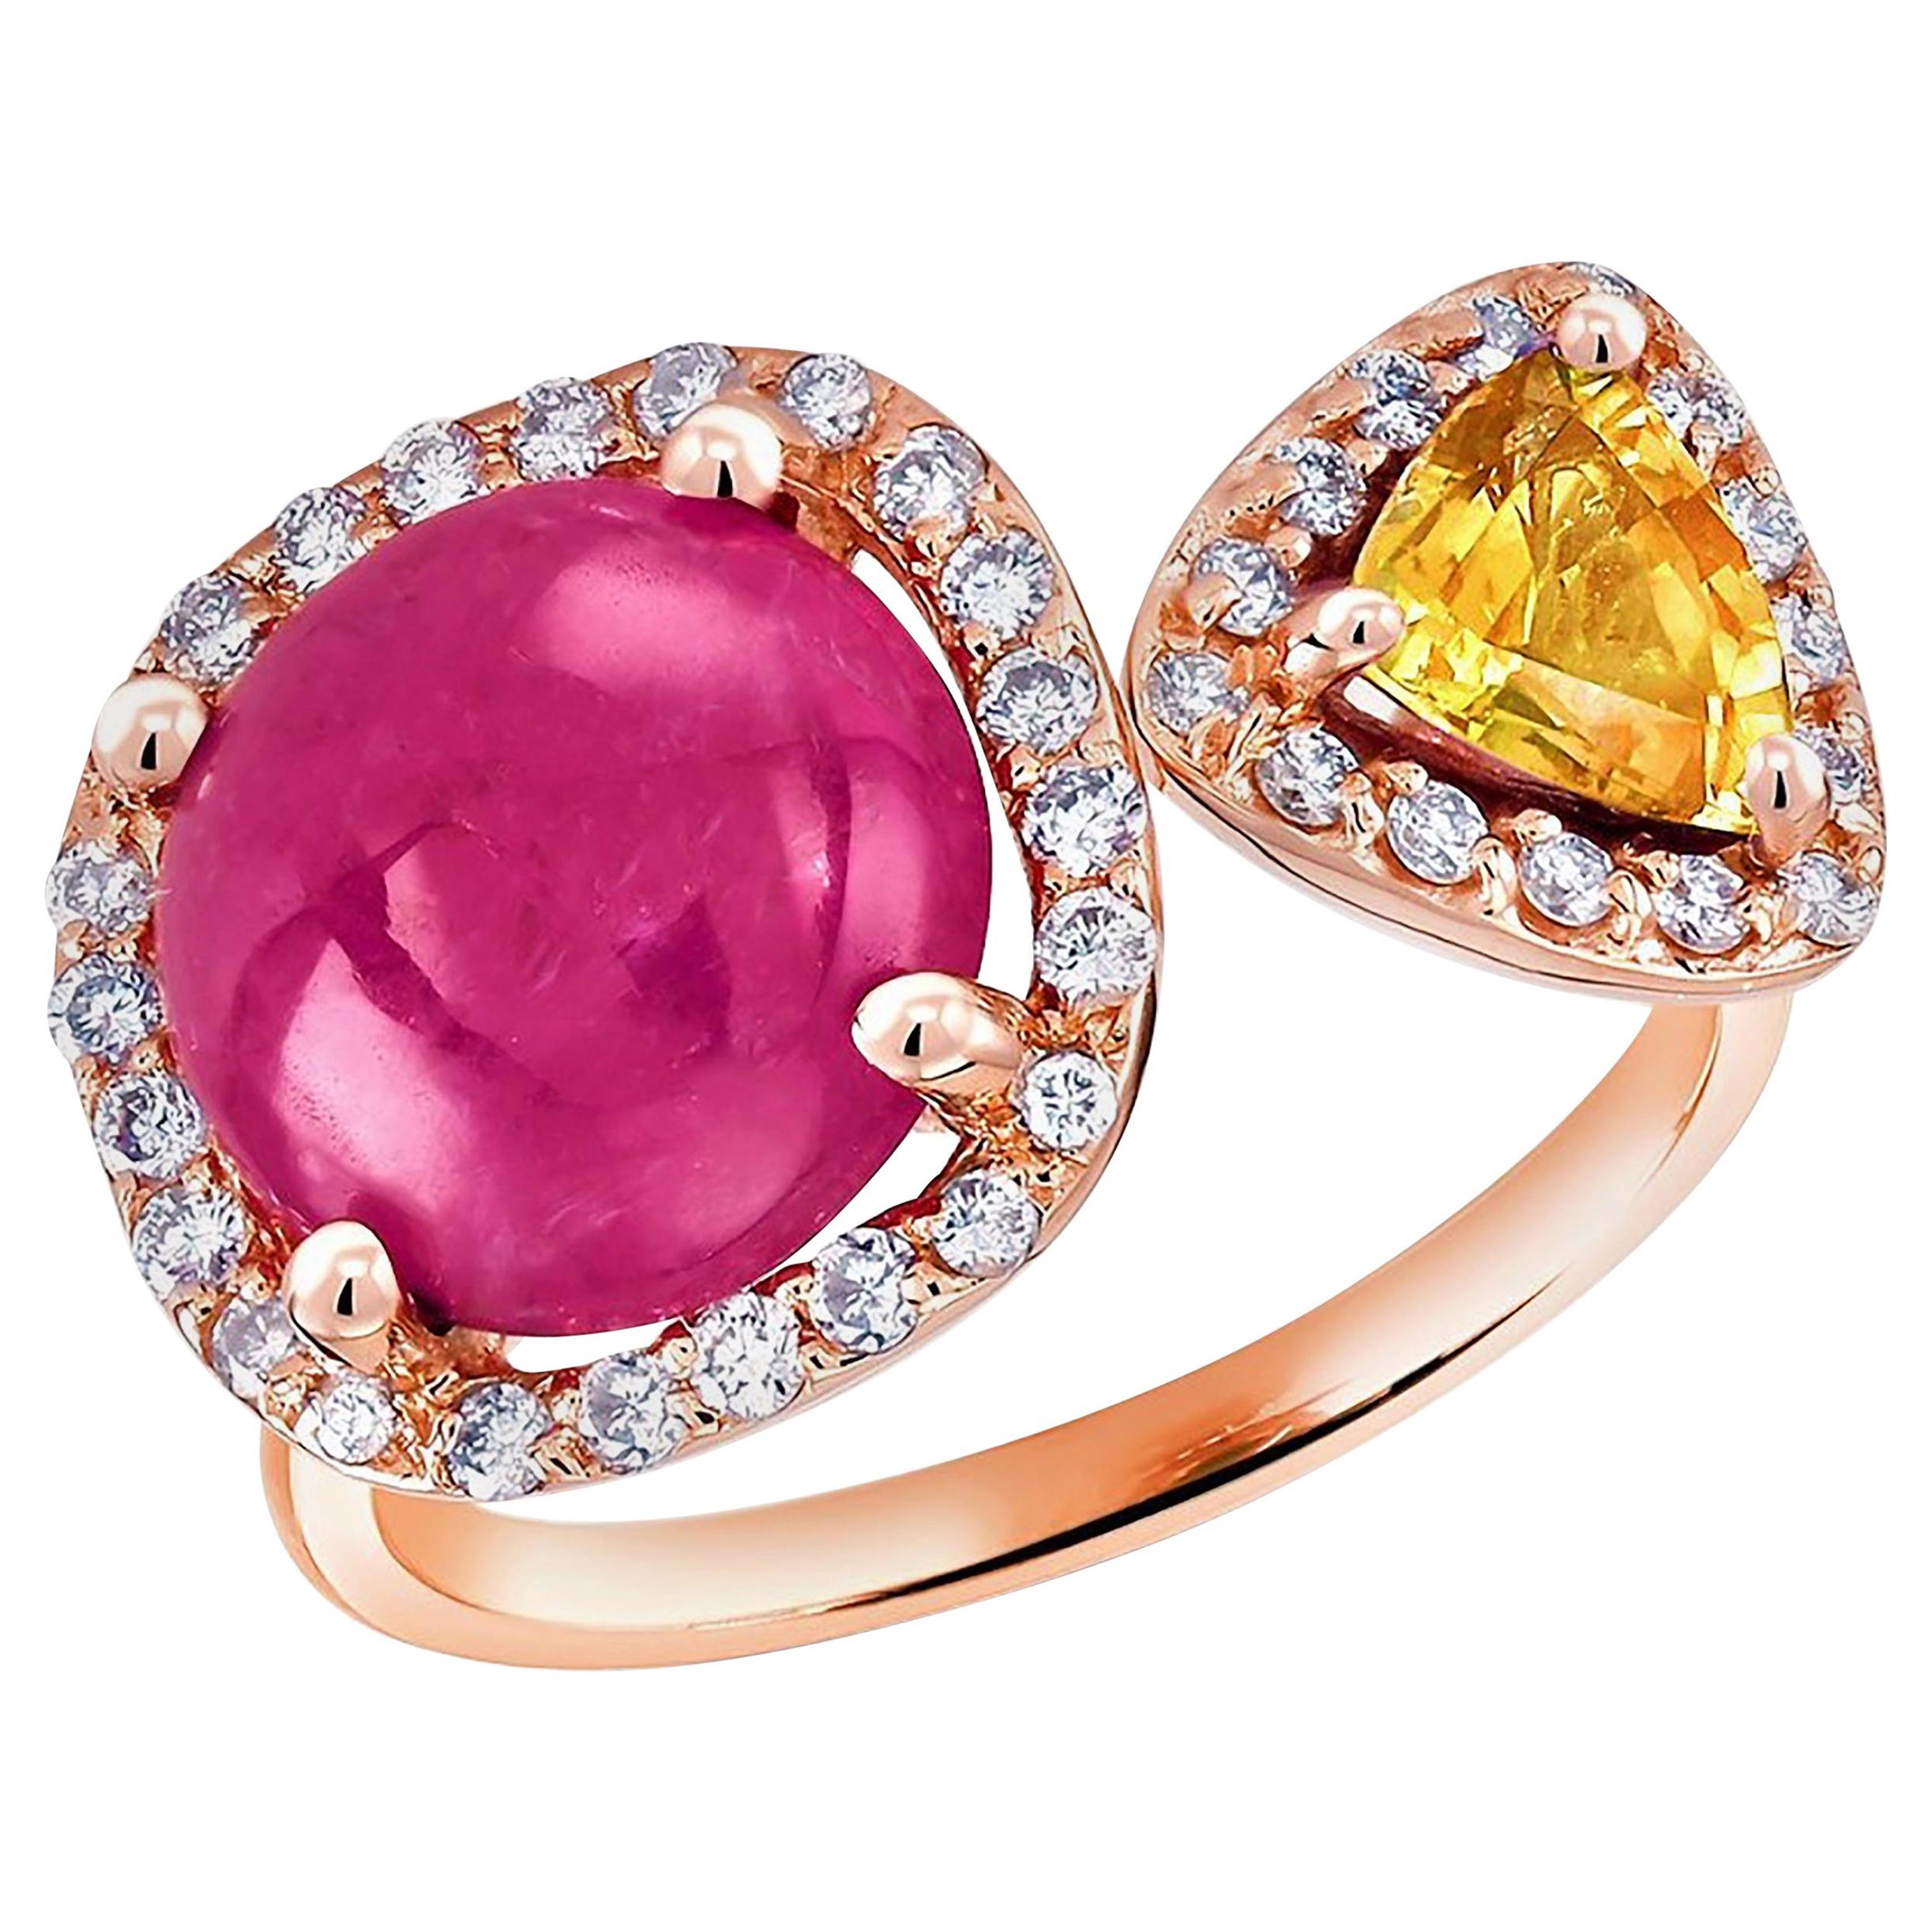 Burma Cabochon Ruby Diamond Yellow Sapphire Open Shank Rose Gold Cocktail Ring